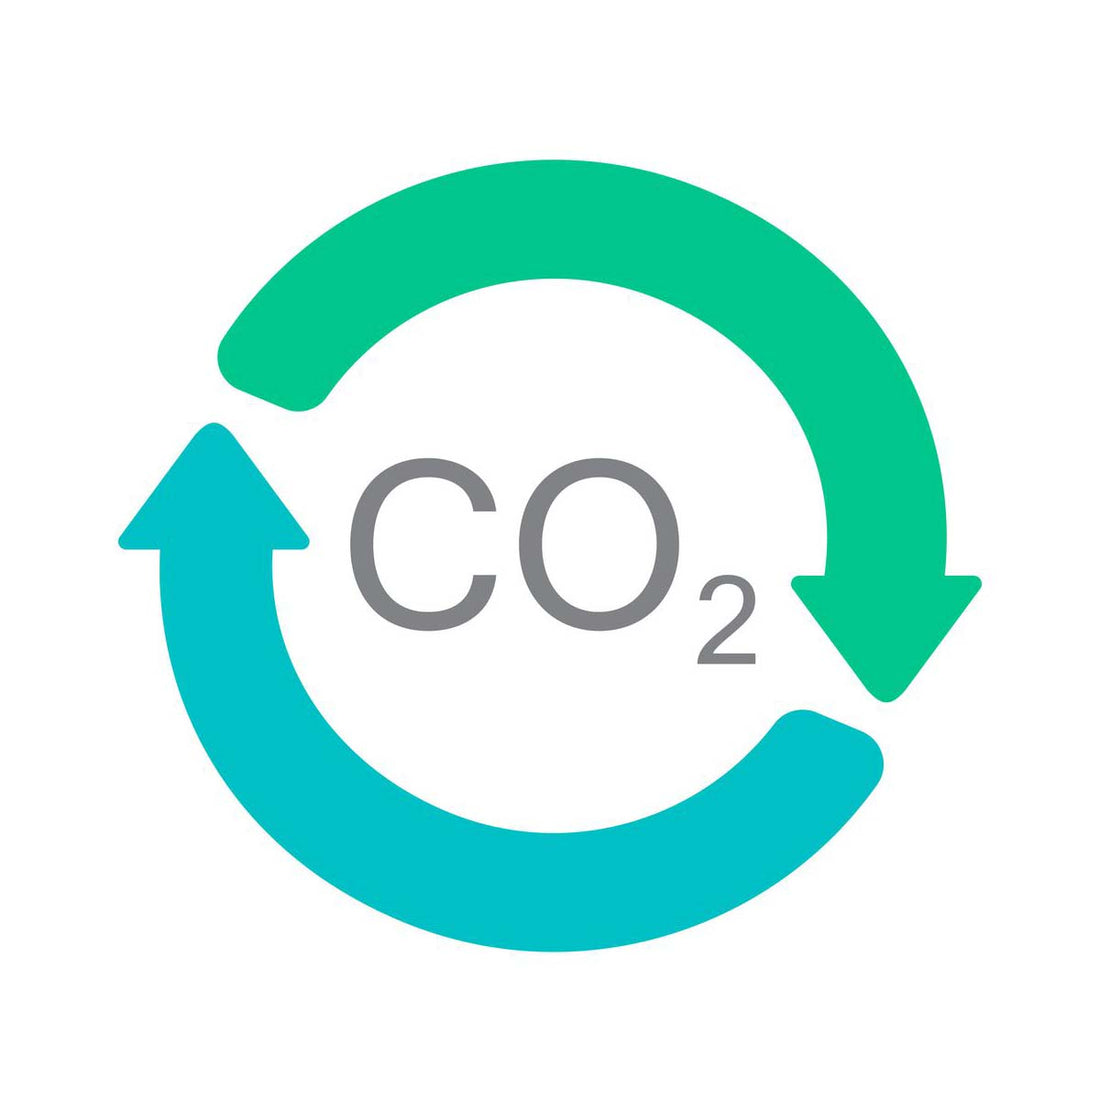 What Is Co2?